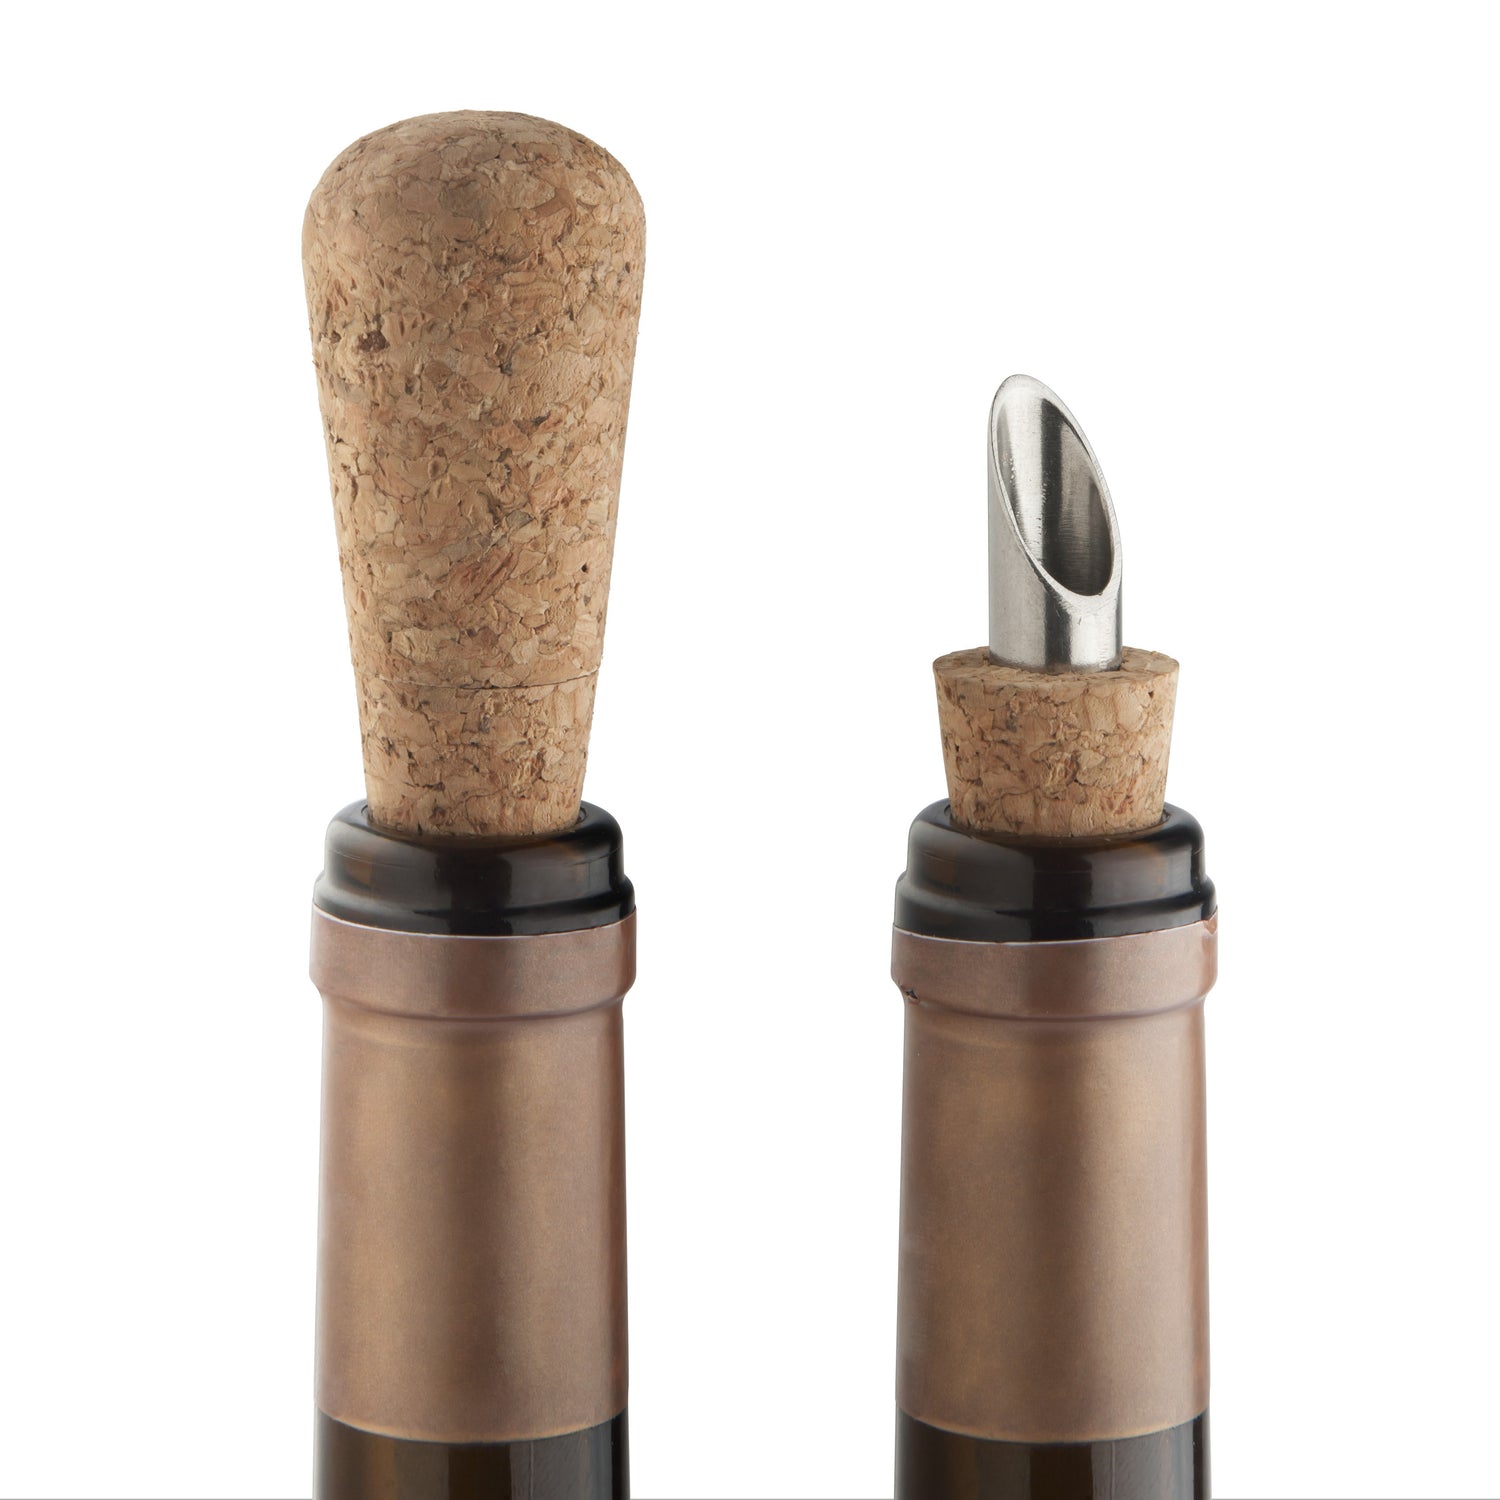 2-in-1 Cork & Pour - Set of 2